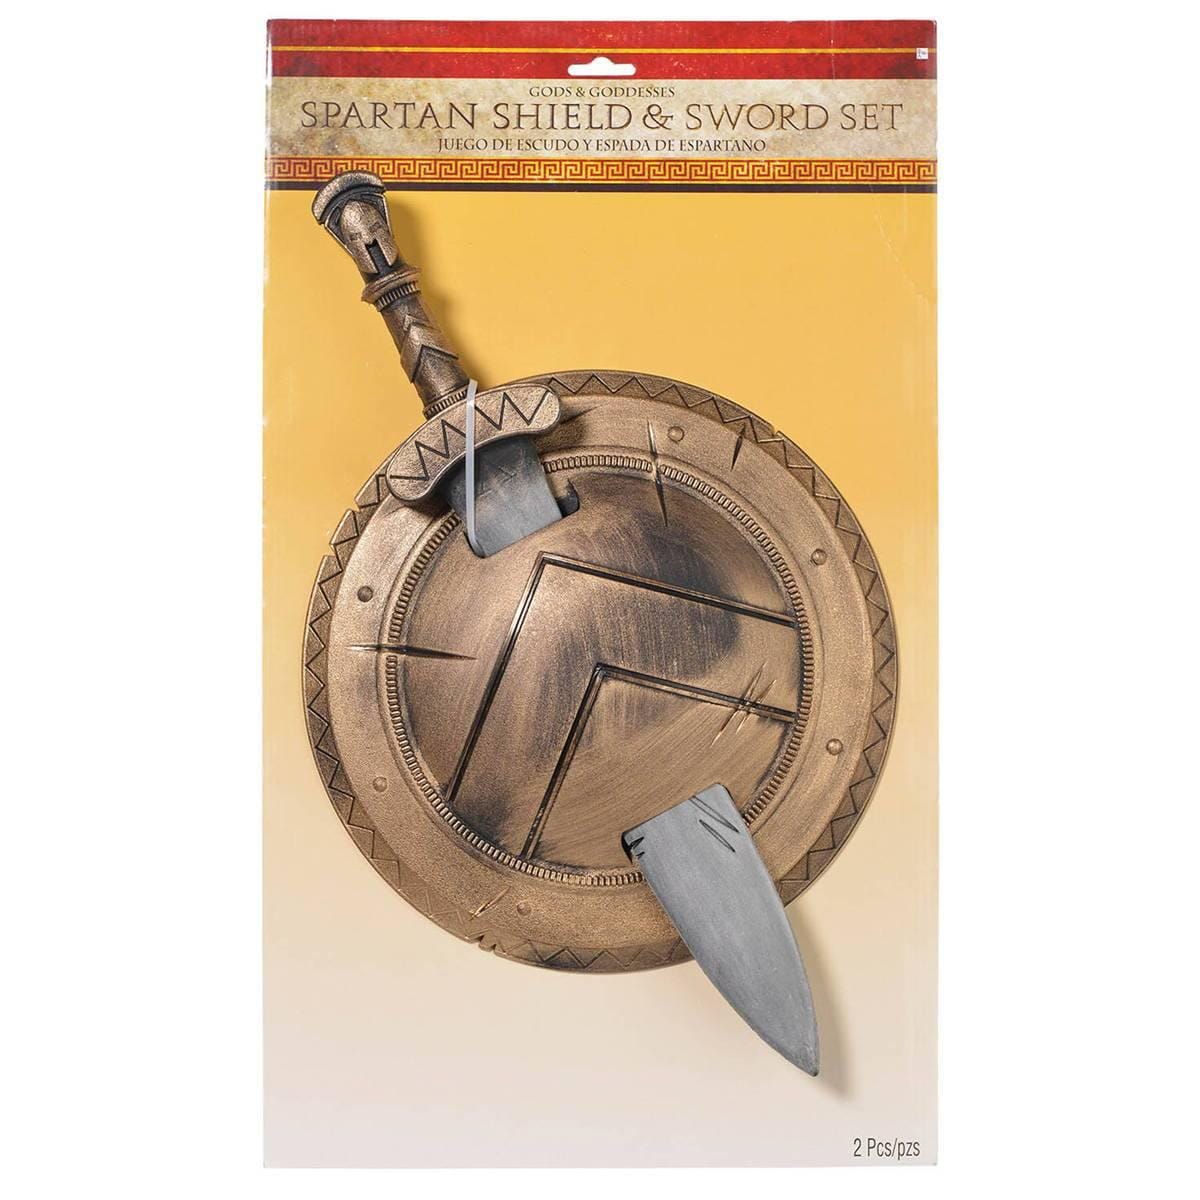 Buy Costume Accessories Spartan shield & sword set sold at Party Expert